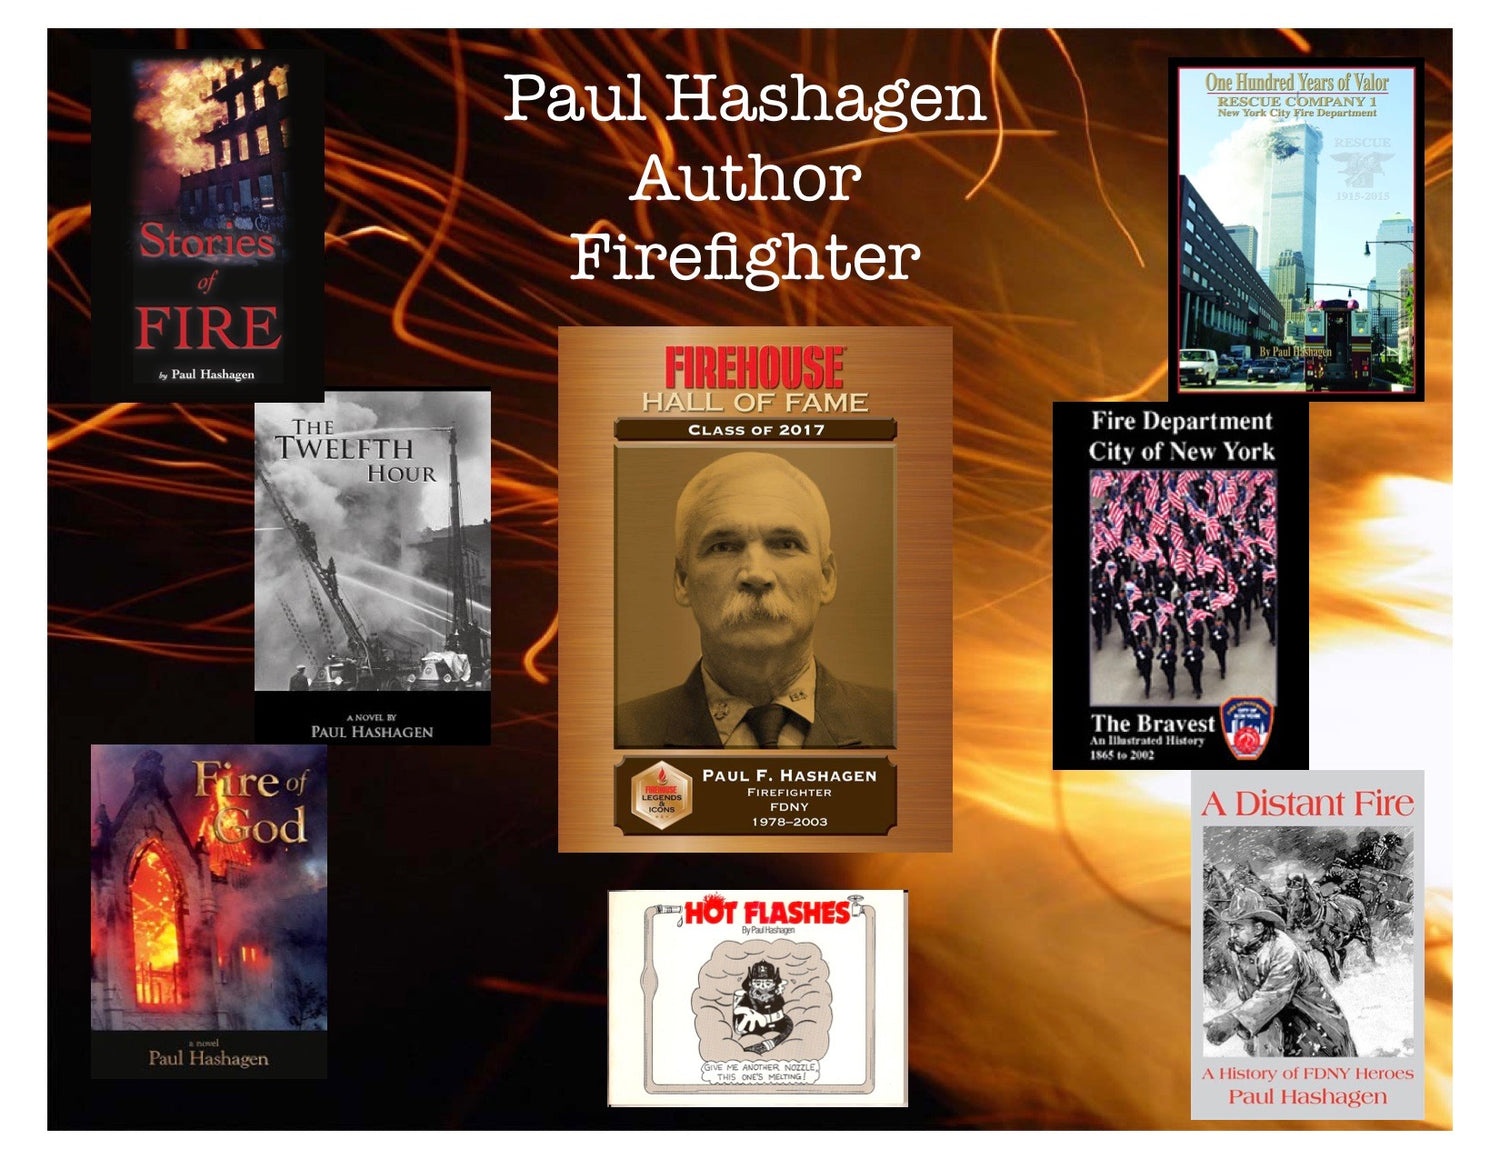 Books about firefighting